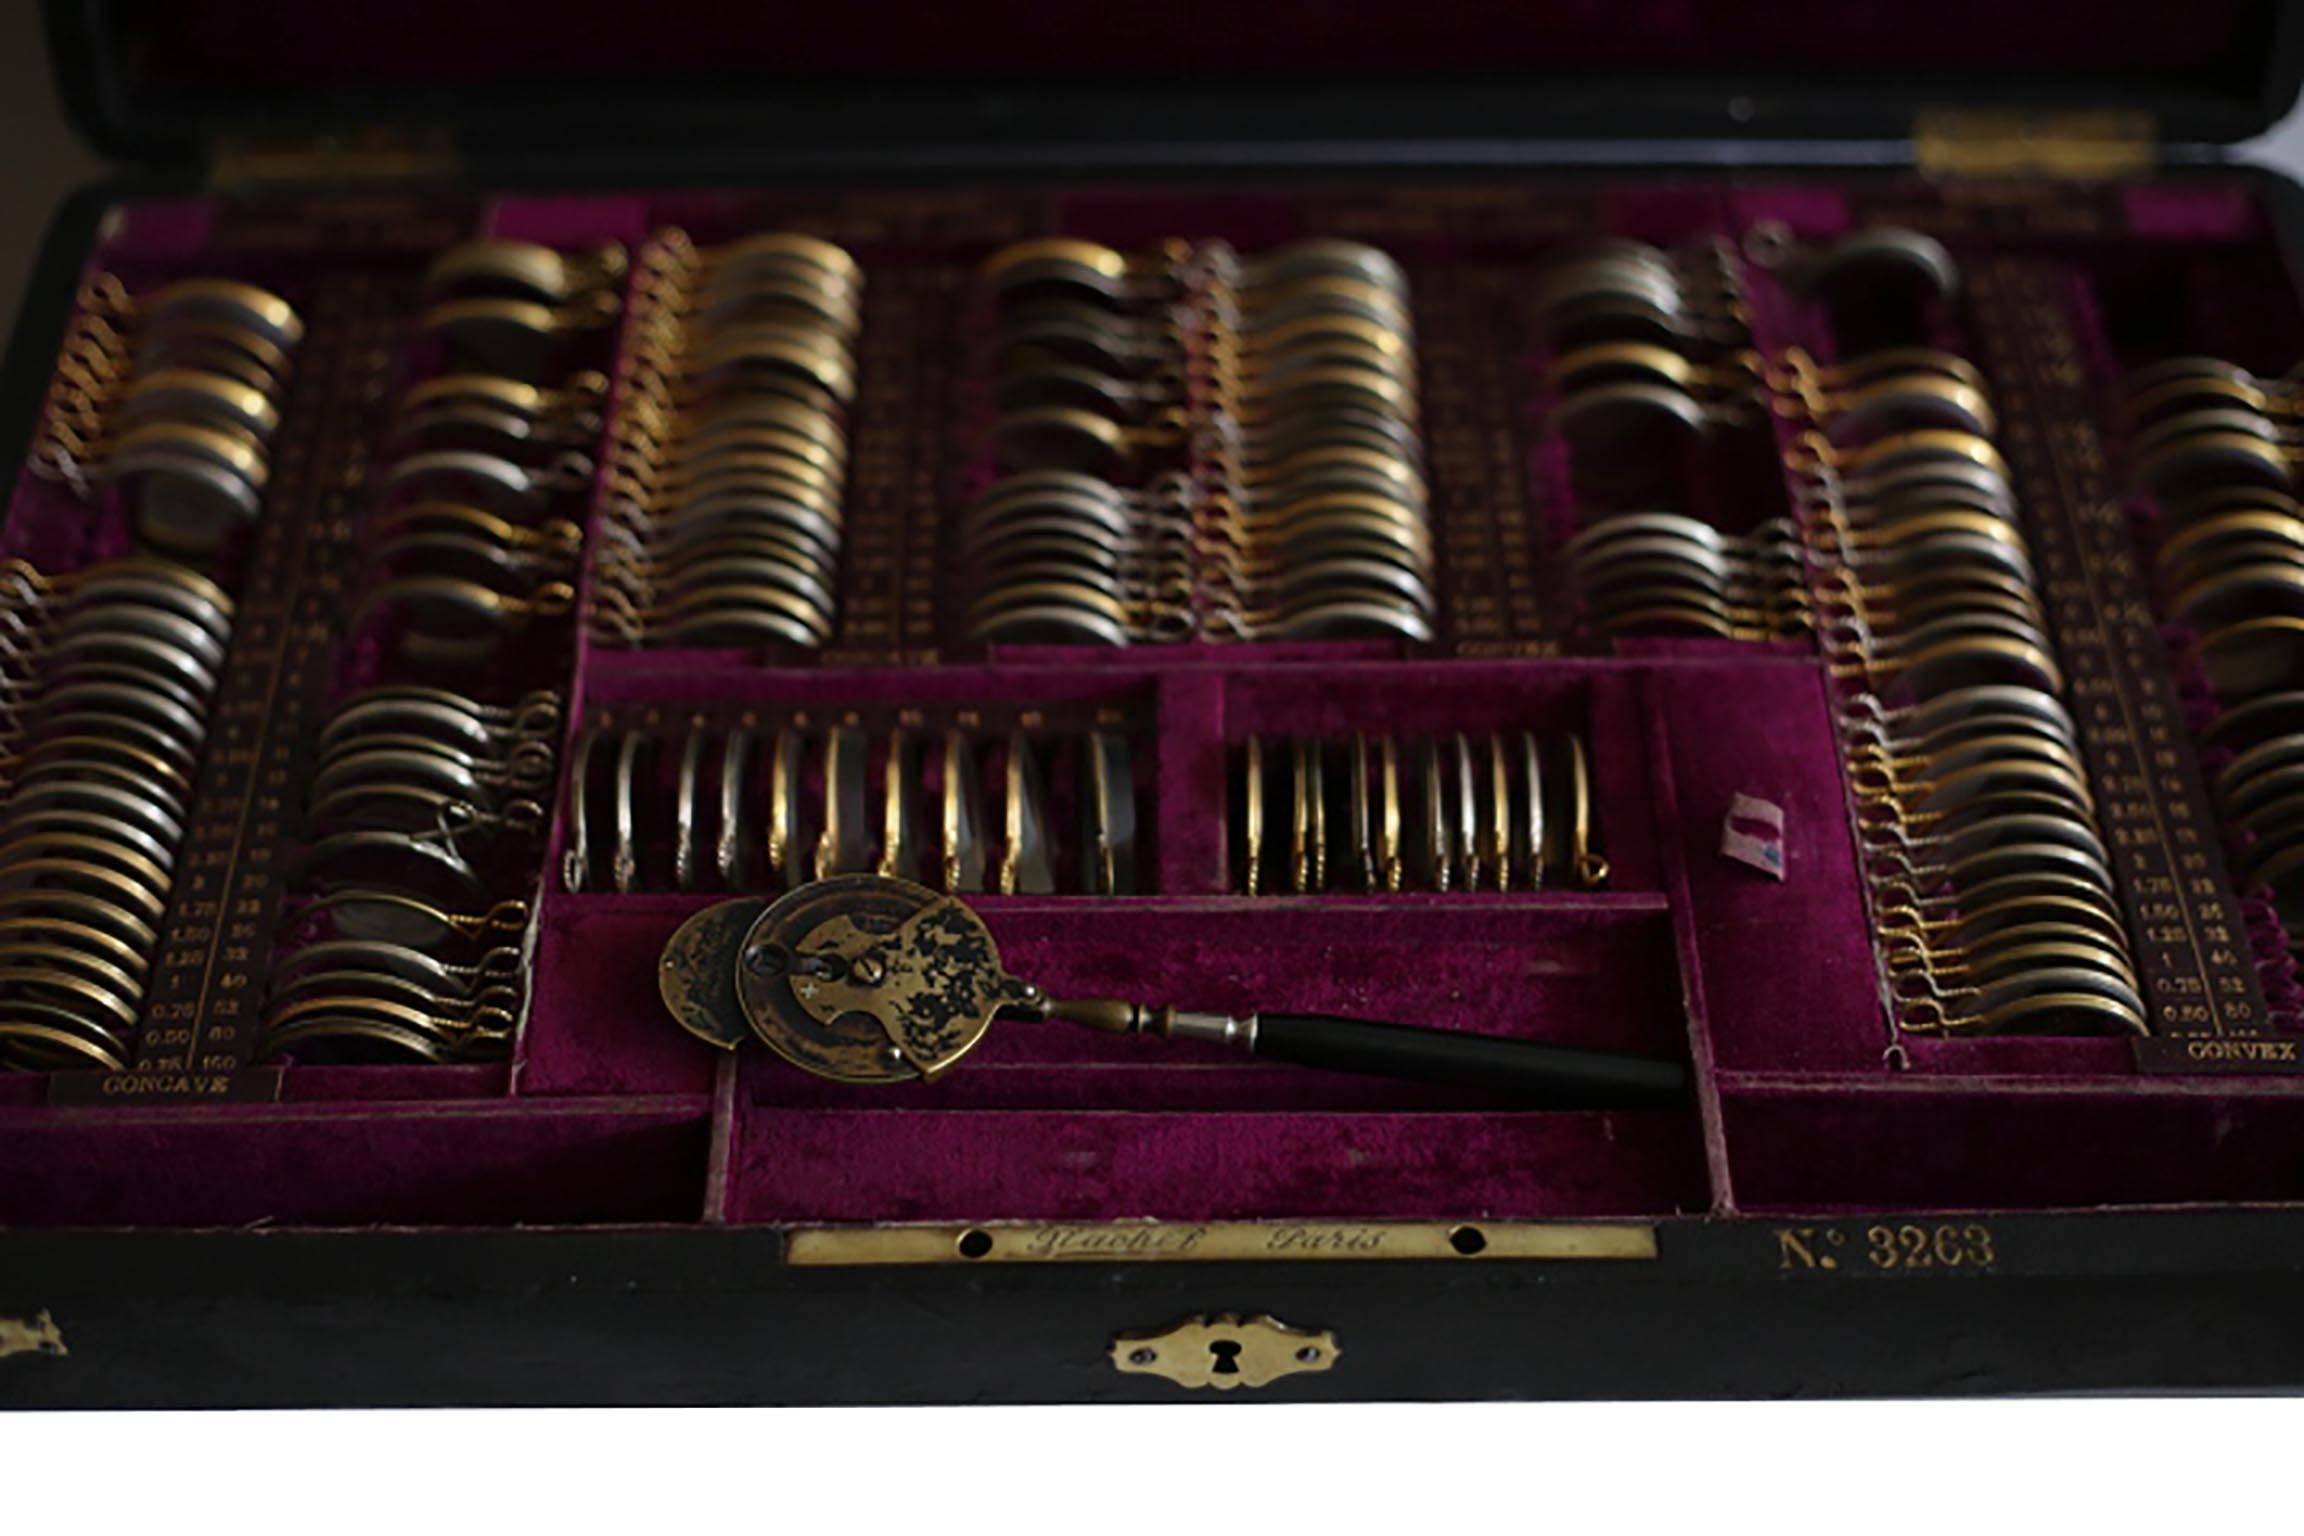 ABOUT

An original Victorian optometrist eye testing kit by Nachet & Fils, Paris #3263. The kit is a leather case lined in purple velvet filled with glass optical lens wrapped in brass. Each lens fits into a numbered and named slot in the case. A